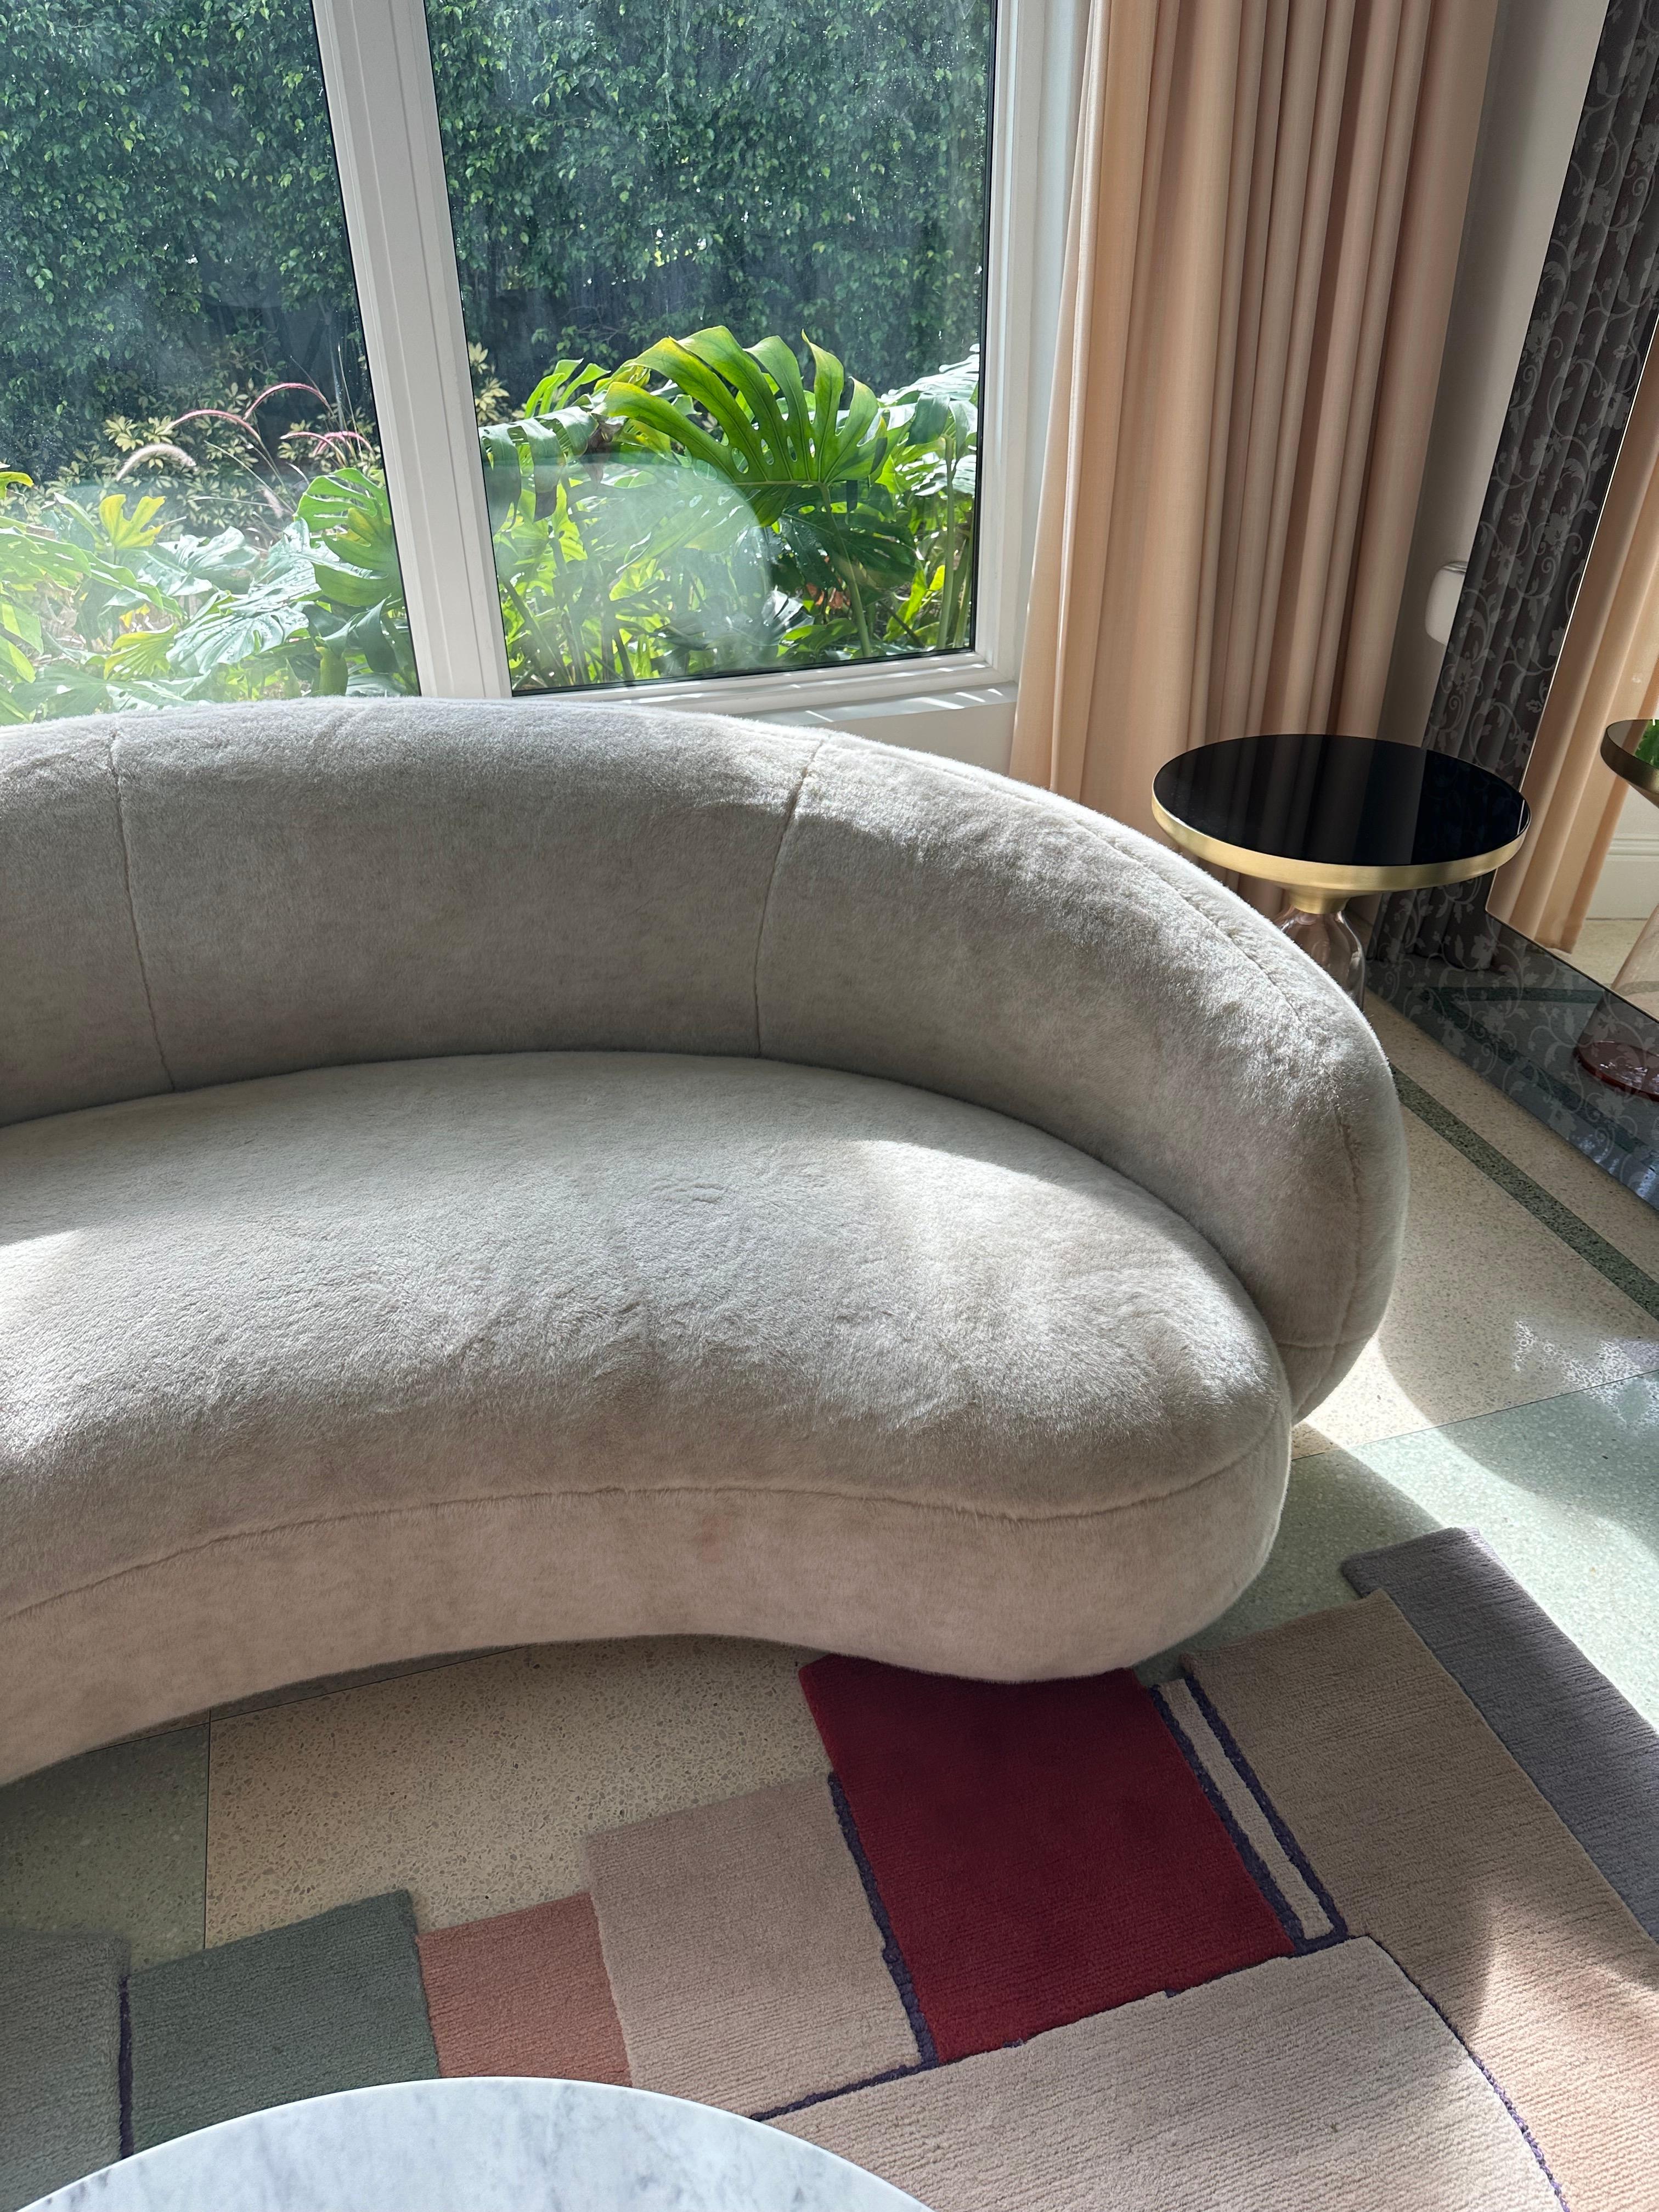 OJUL240
Soft, enveloping shapes characterize this family of upholstered pieces. Julep is influenced by the 1950s Avant-Garde movement, drawing upon its simplicity and grandeur, refined by a contemporary, romantic, feminine allure. Star of the